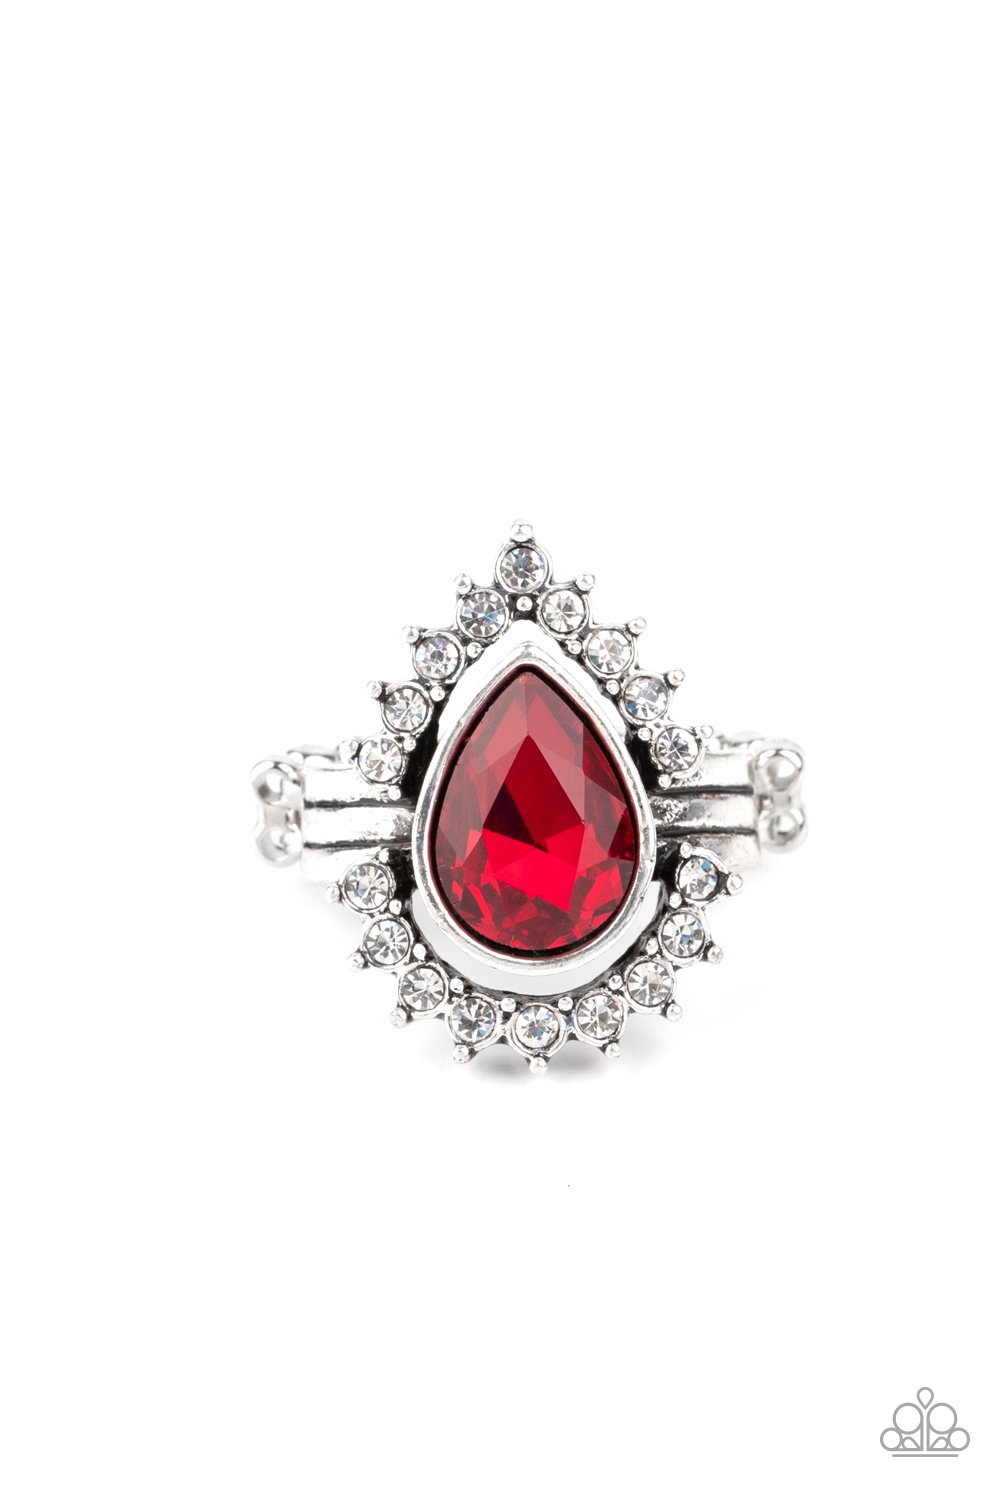 Ring - Make Your TRADEMARK - Red